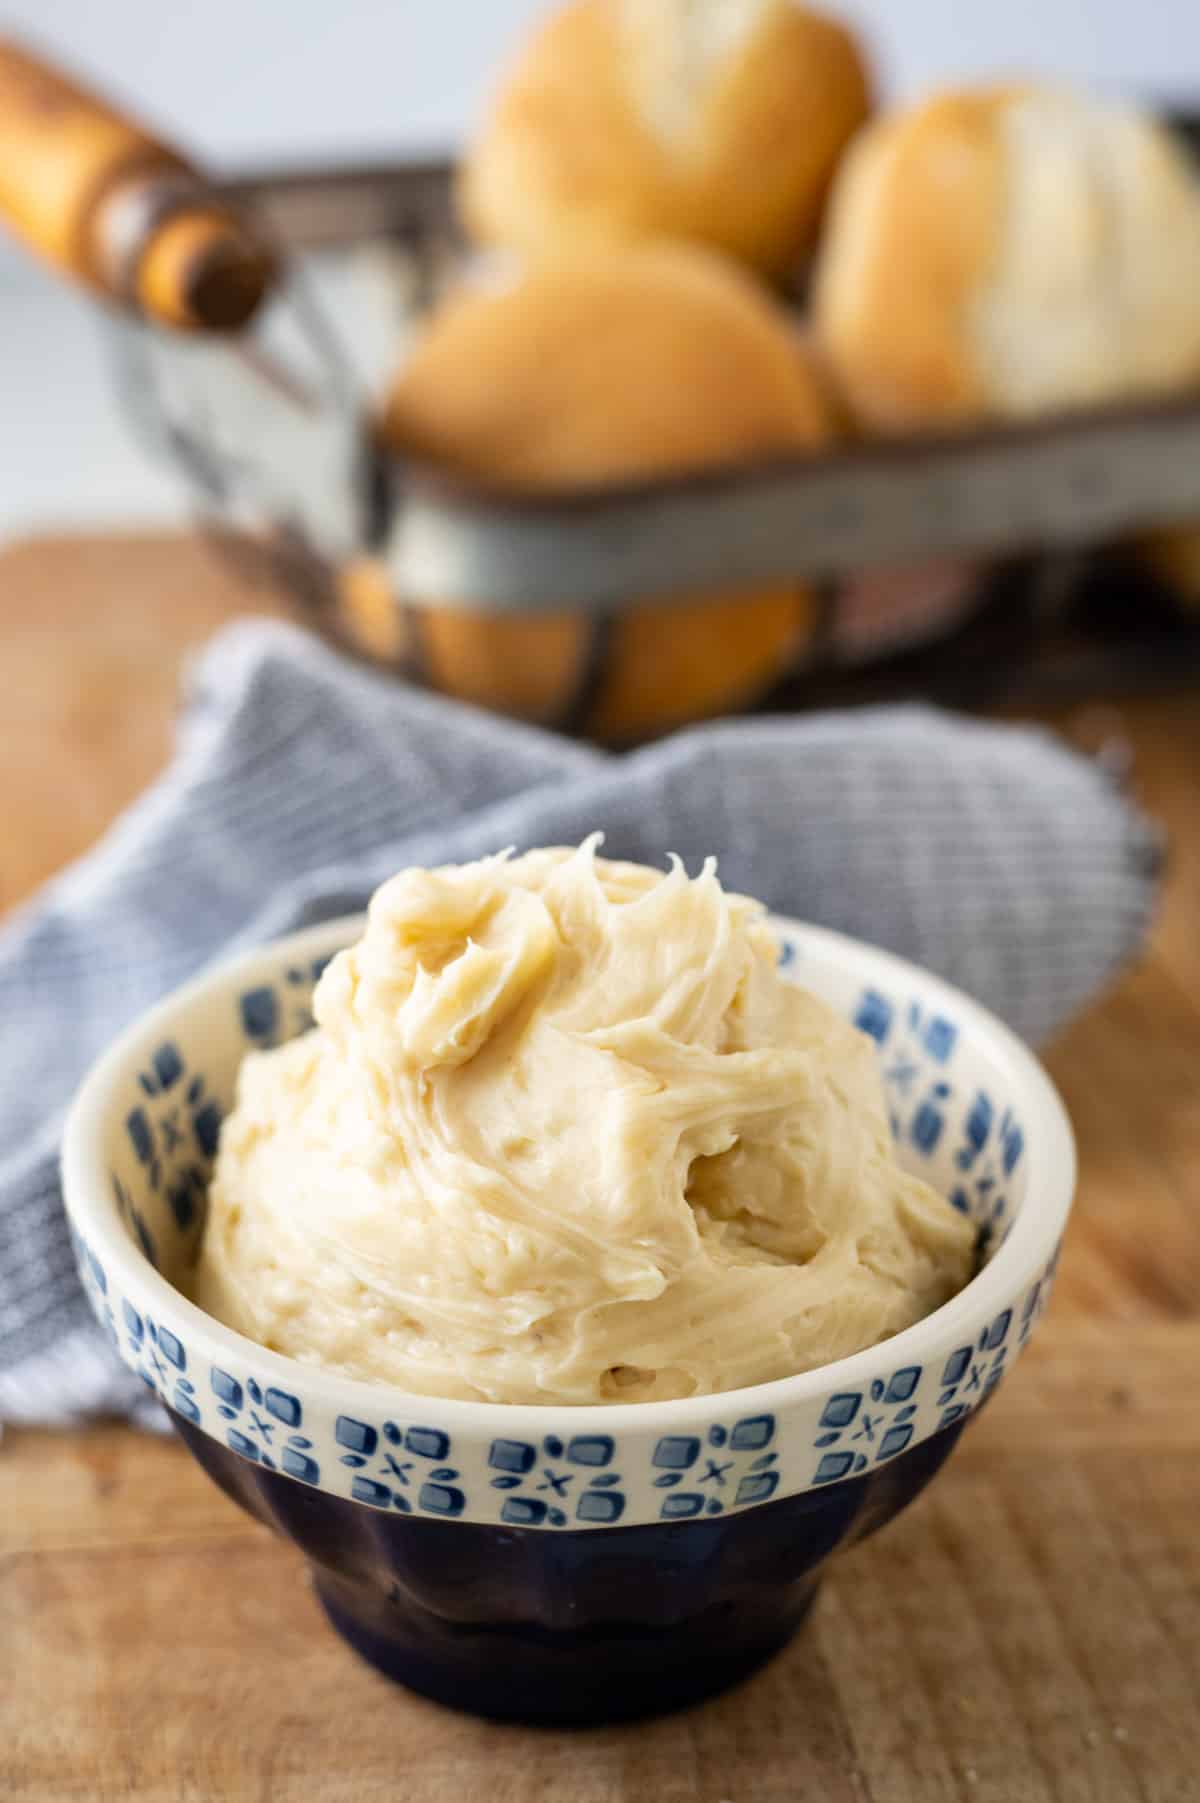 Honey butter in a blue dish with rolls in the background.